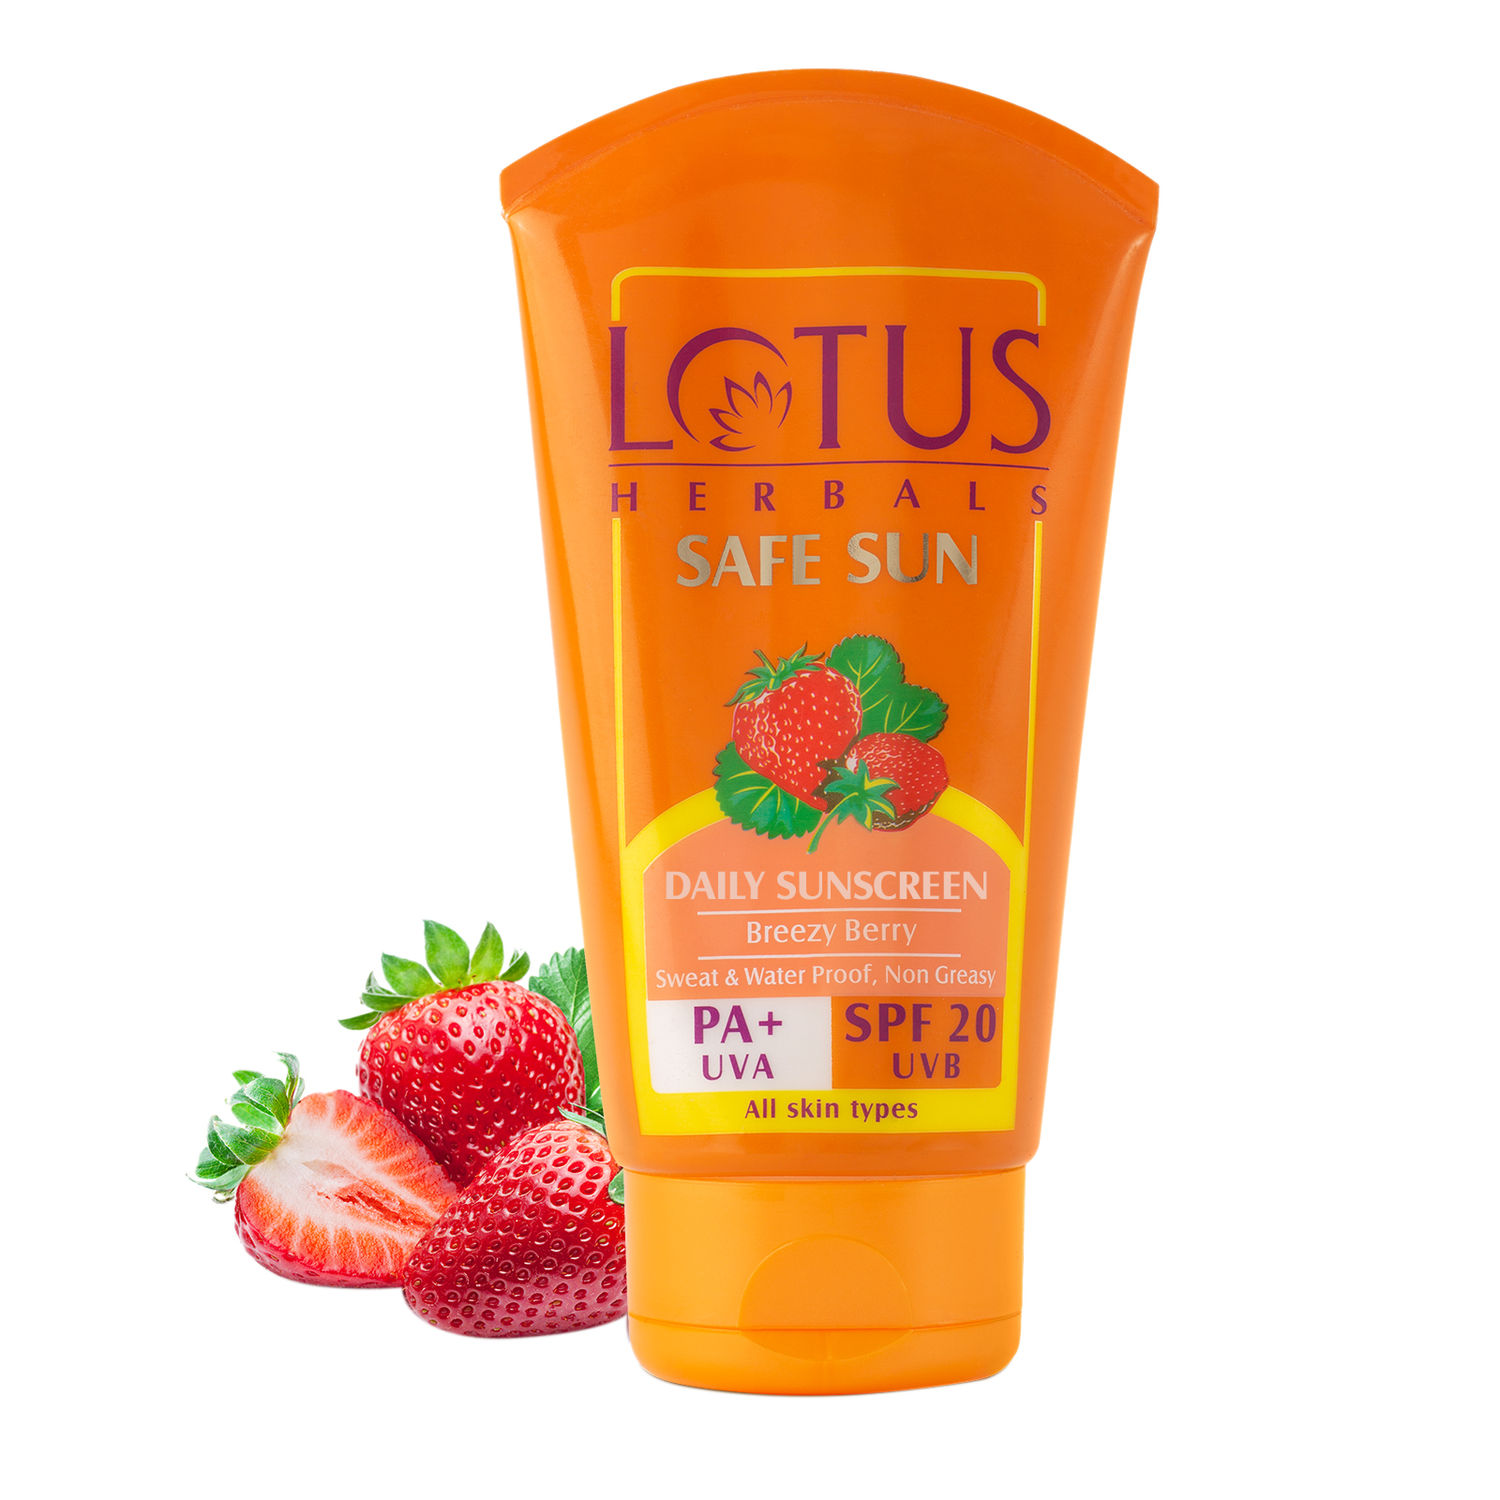 Buy Lotus Herbals Safe Sun Sunscreen Cream - Breezy Berry SPF 20 PA+| Sweat & Waterproof, Non-Greasy| Berry extract| | All skin types| 100gm - Purplle